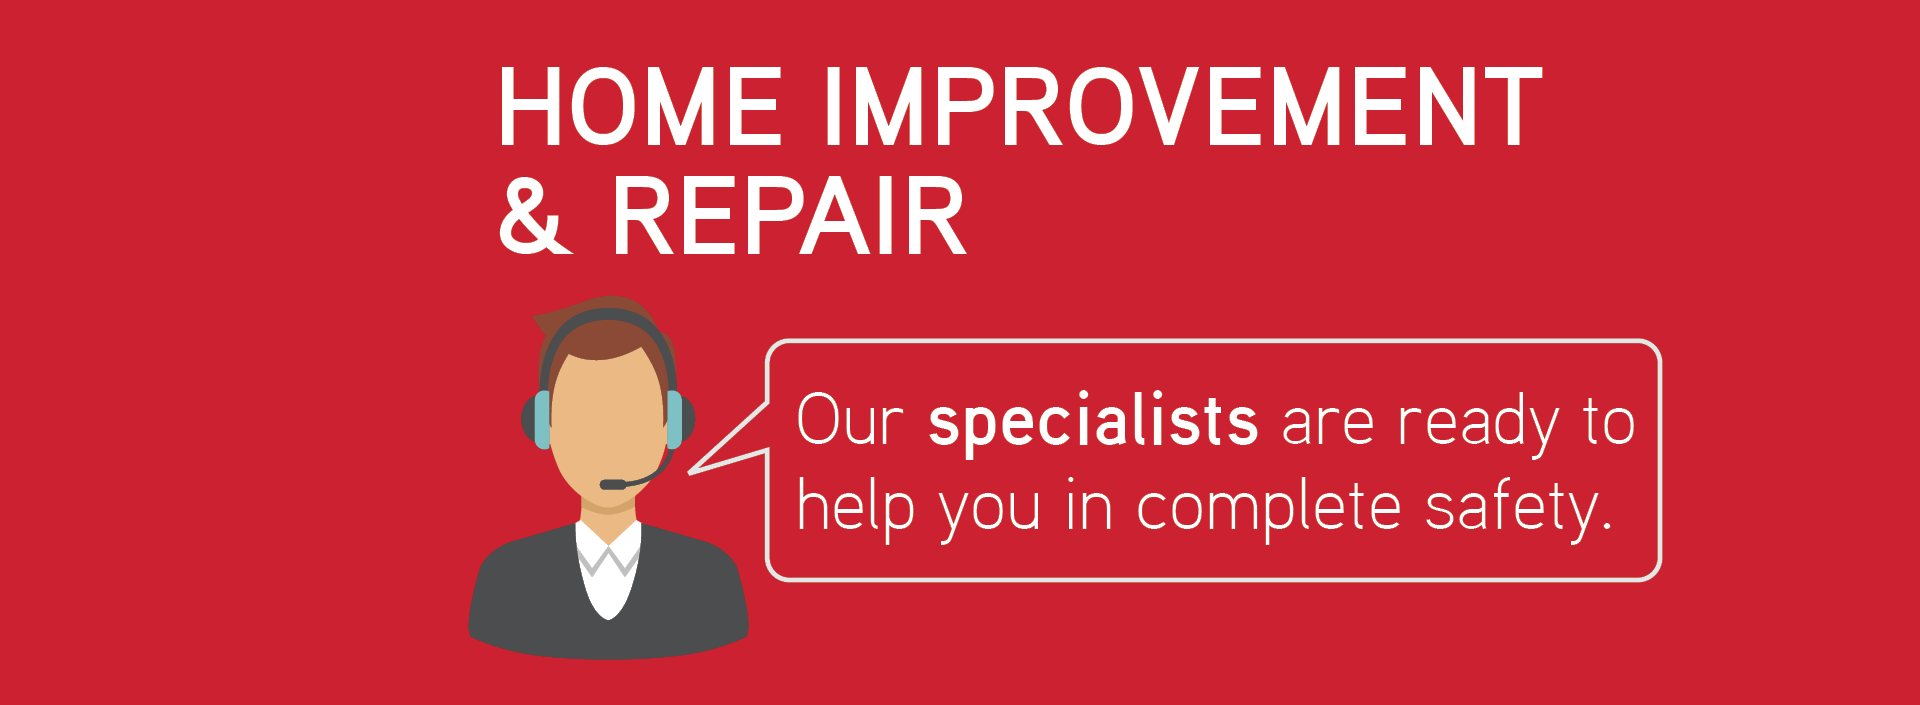 Home improvement & repair: Our specialists are ready to help you in complete safety.